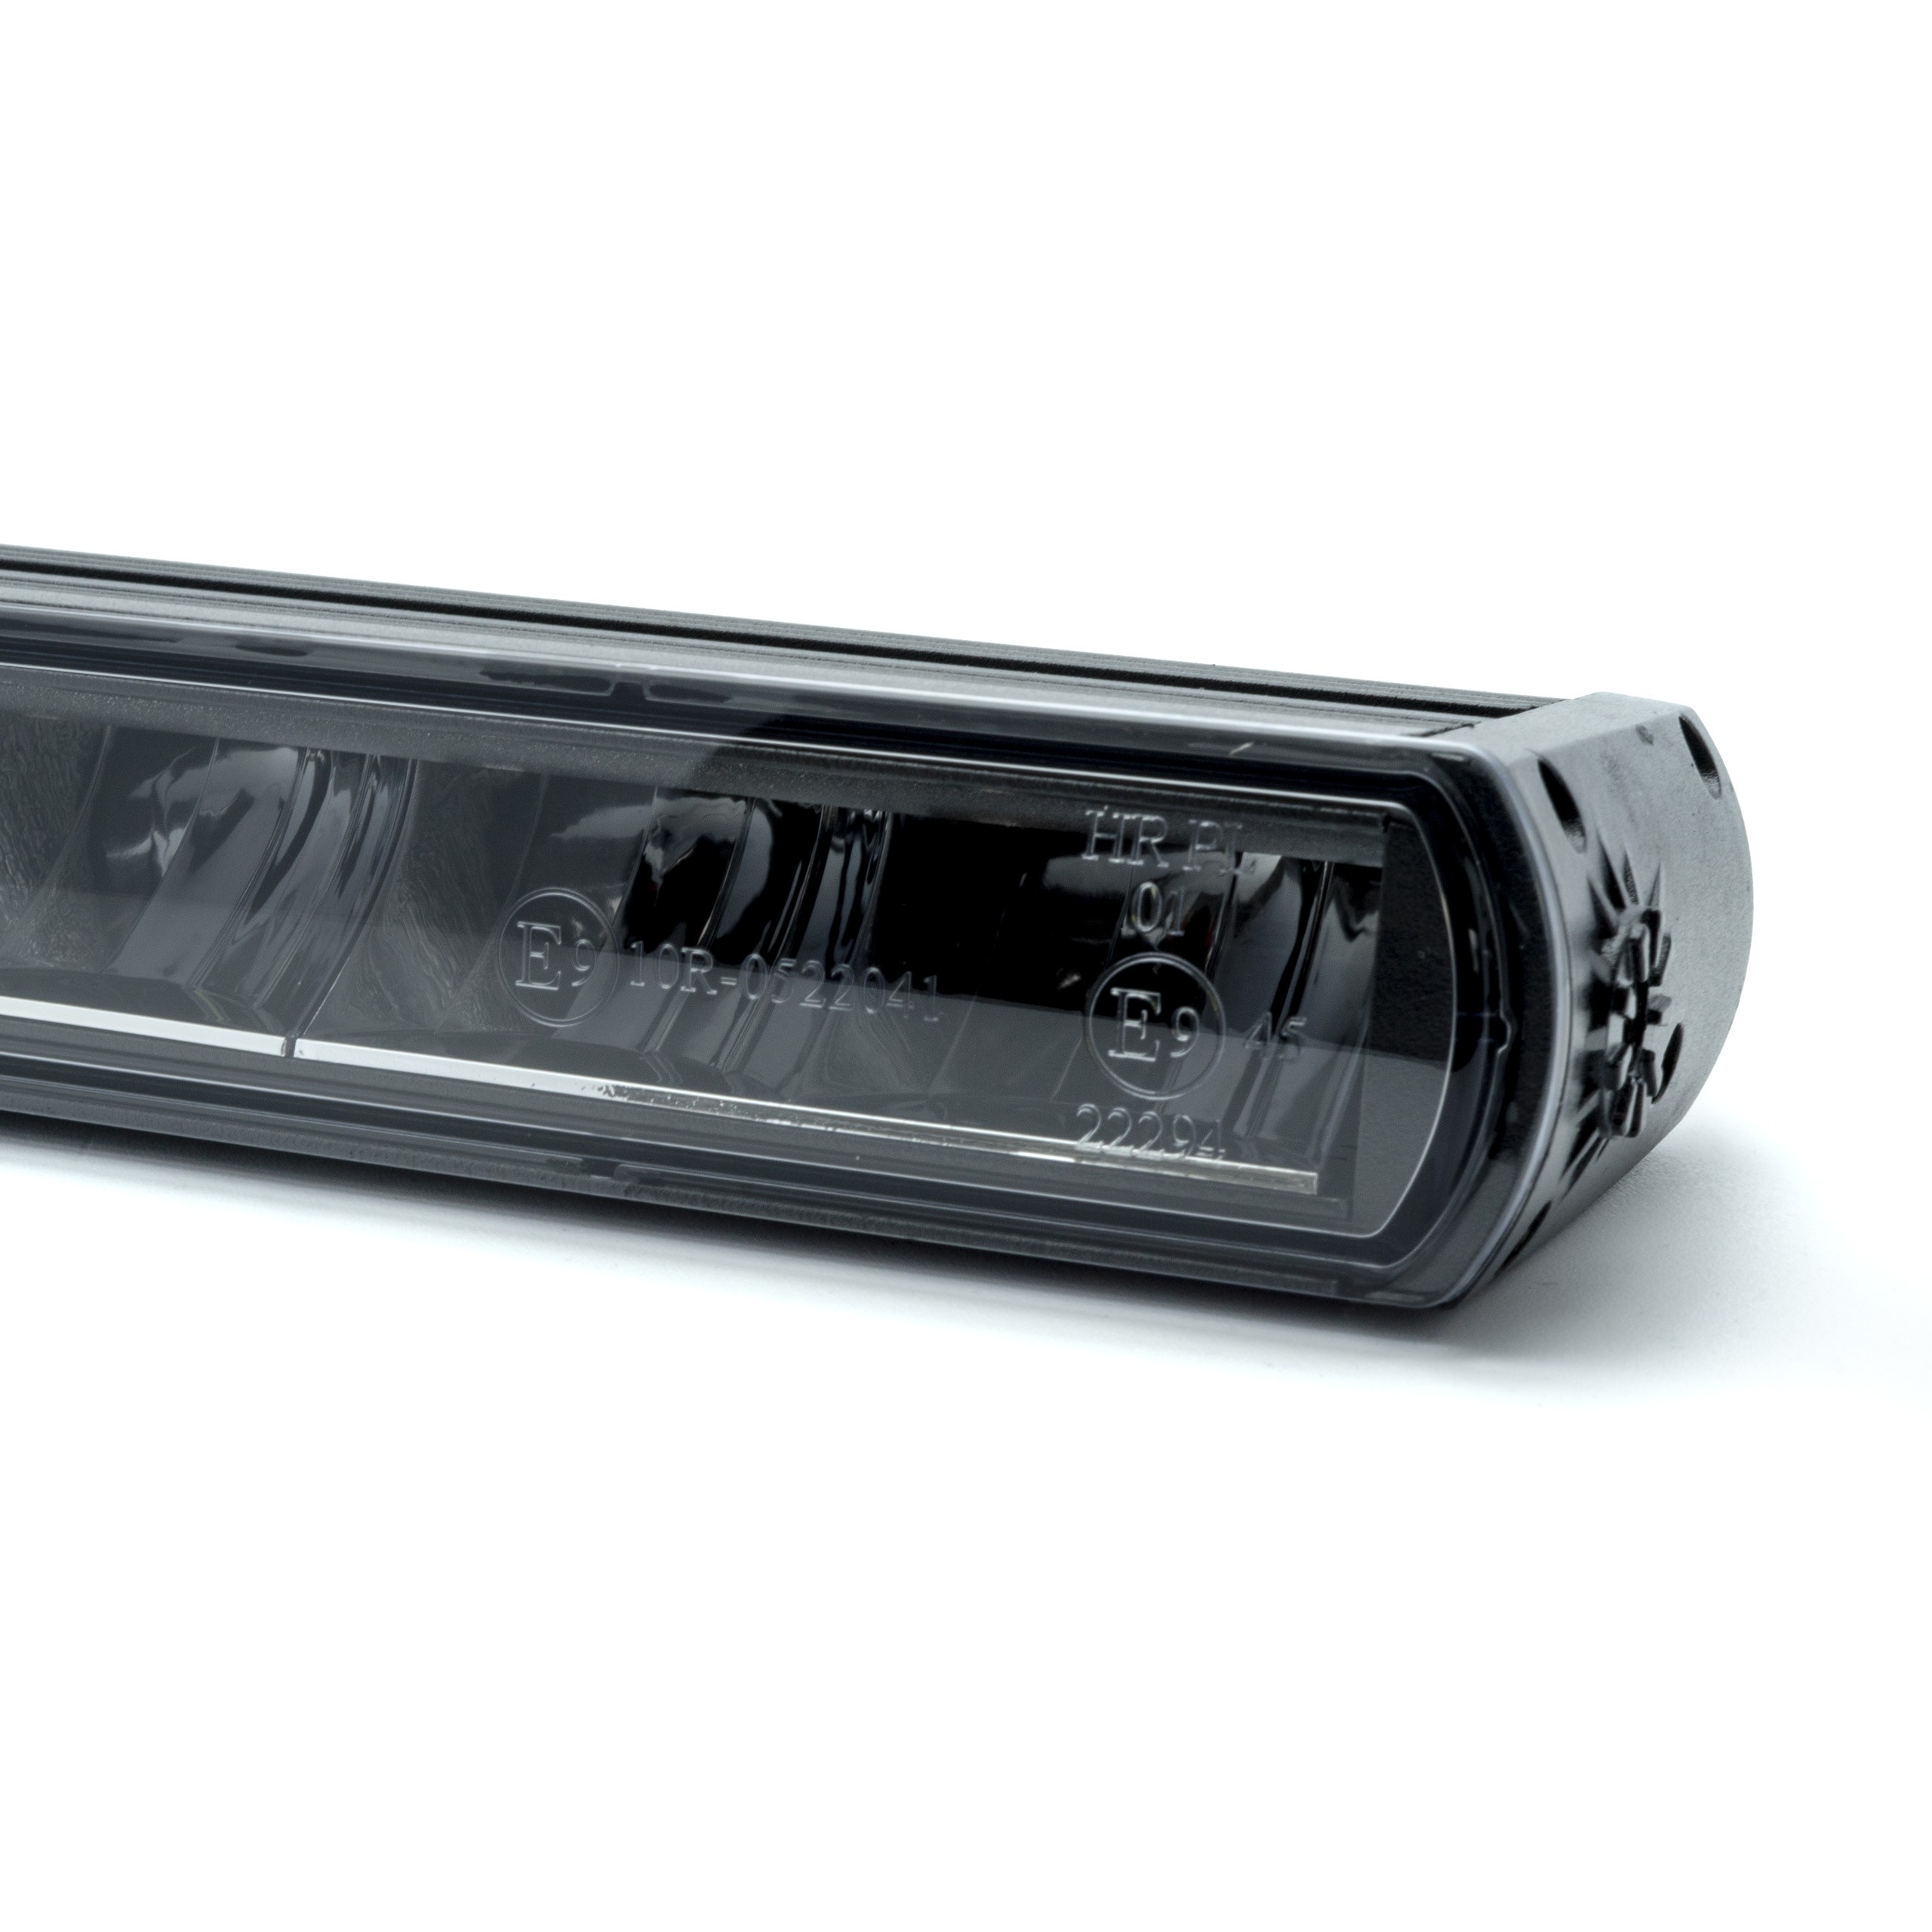 EPWLD06 LED DRIVING LIGHT 84W COMBO CURVED